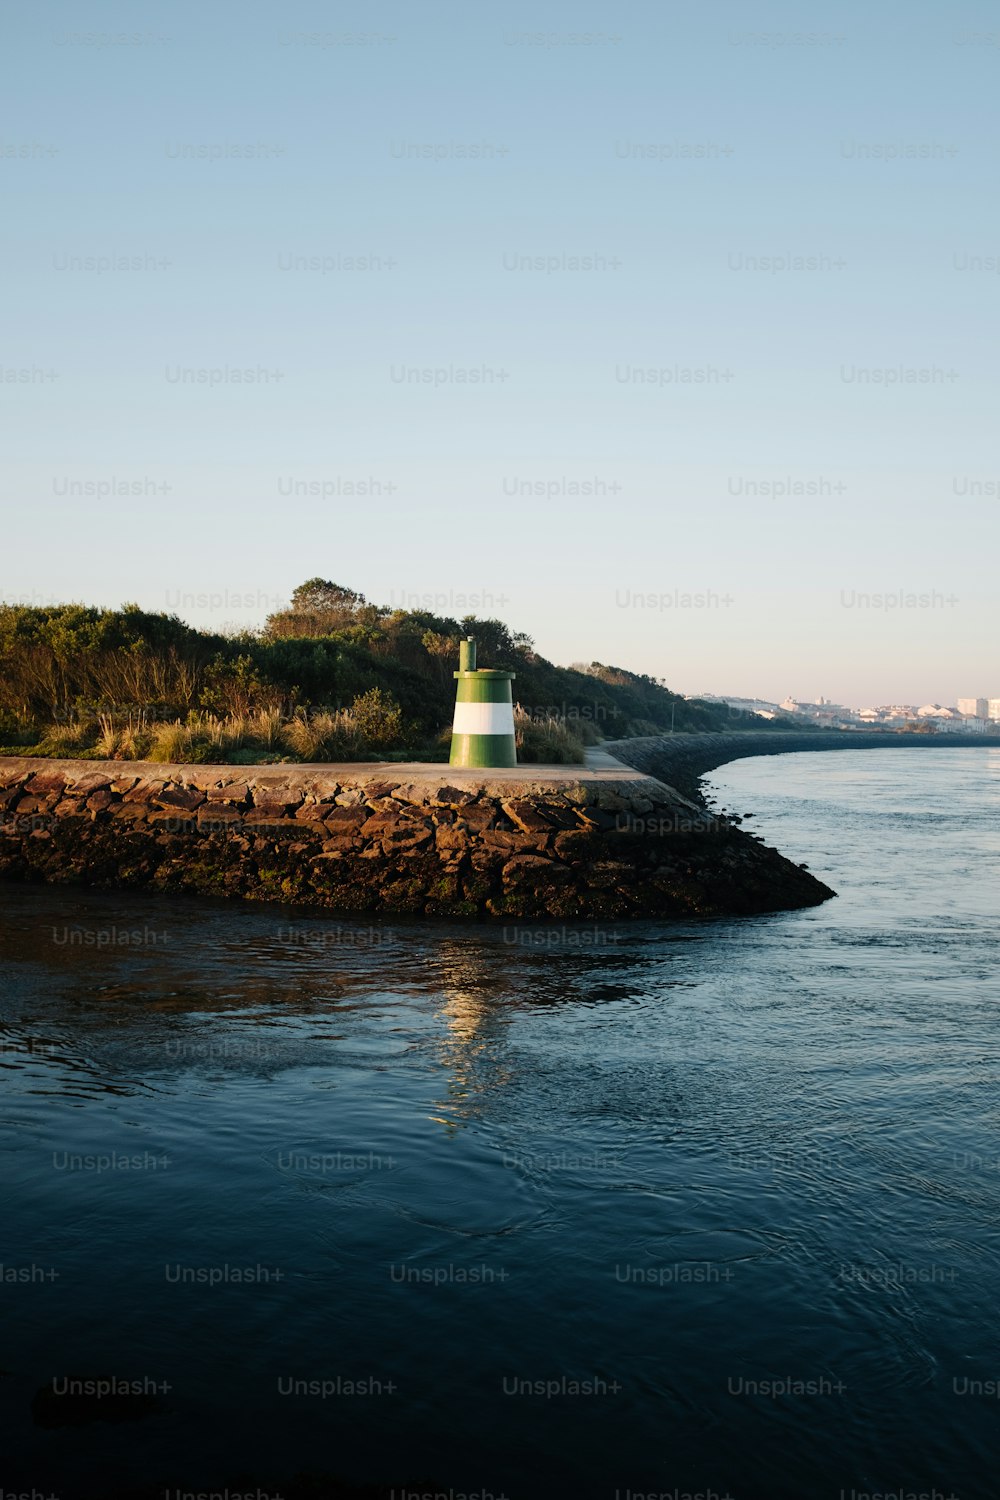 a light house sitting on the edge of a body of water